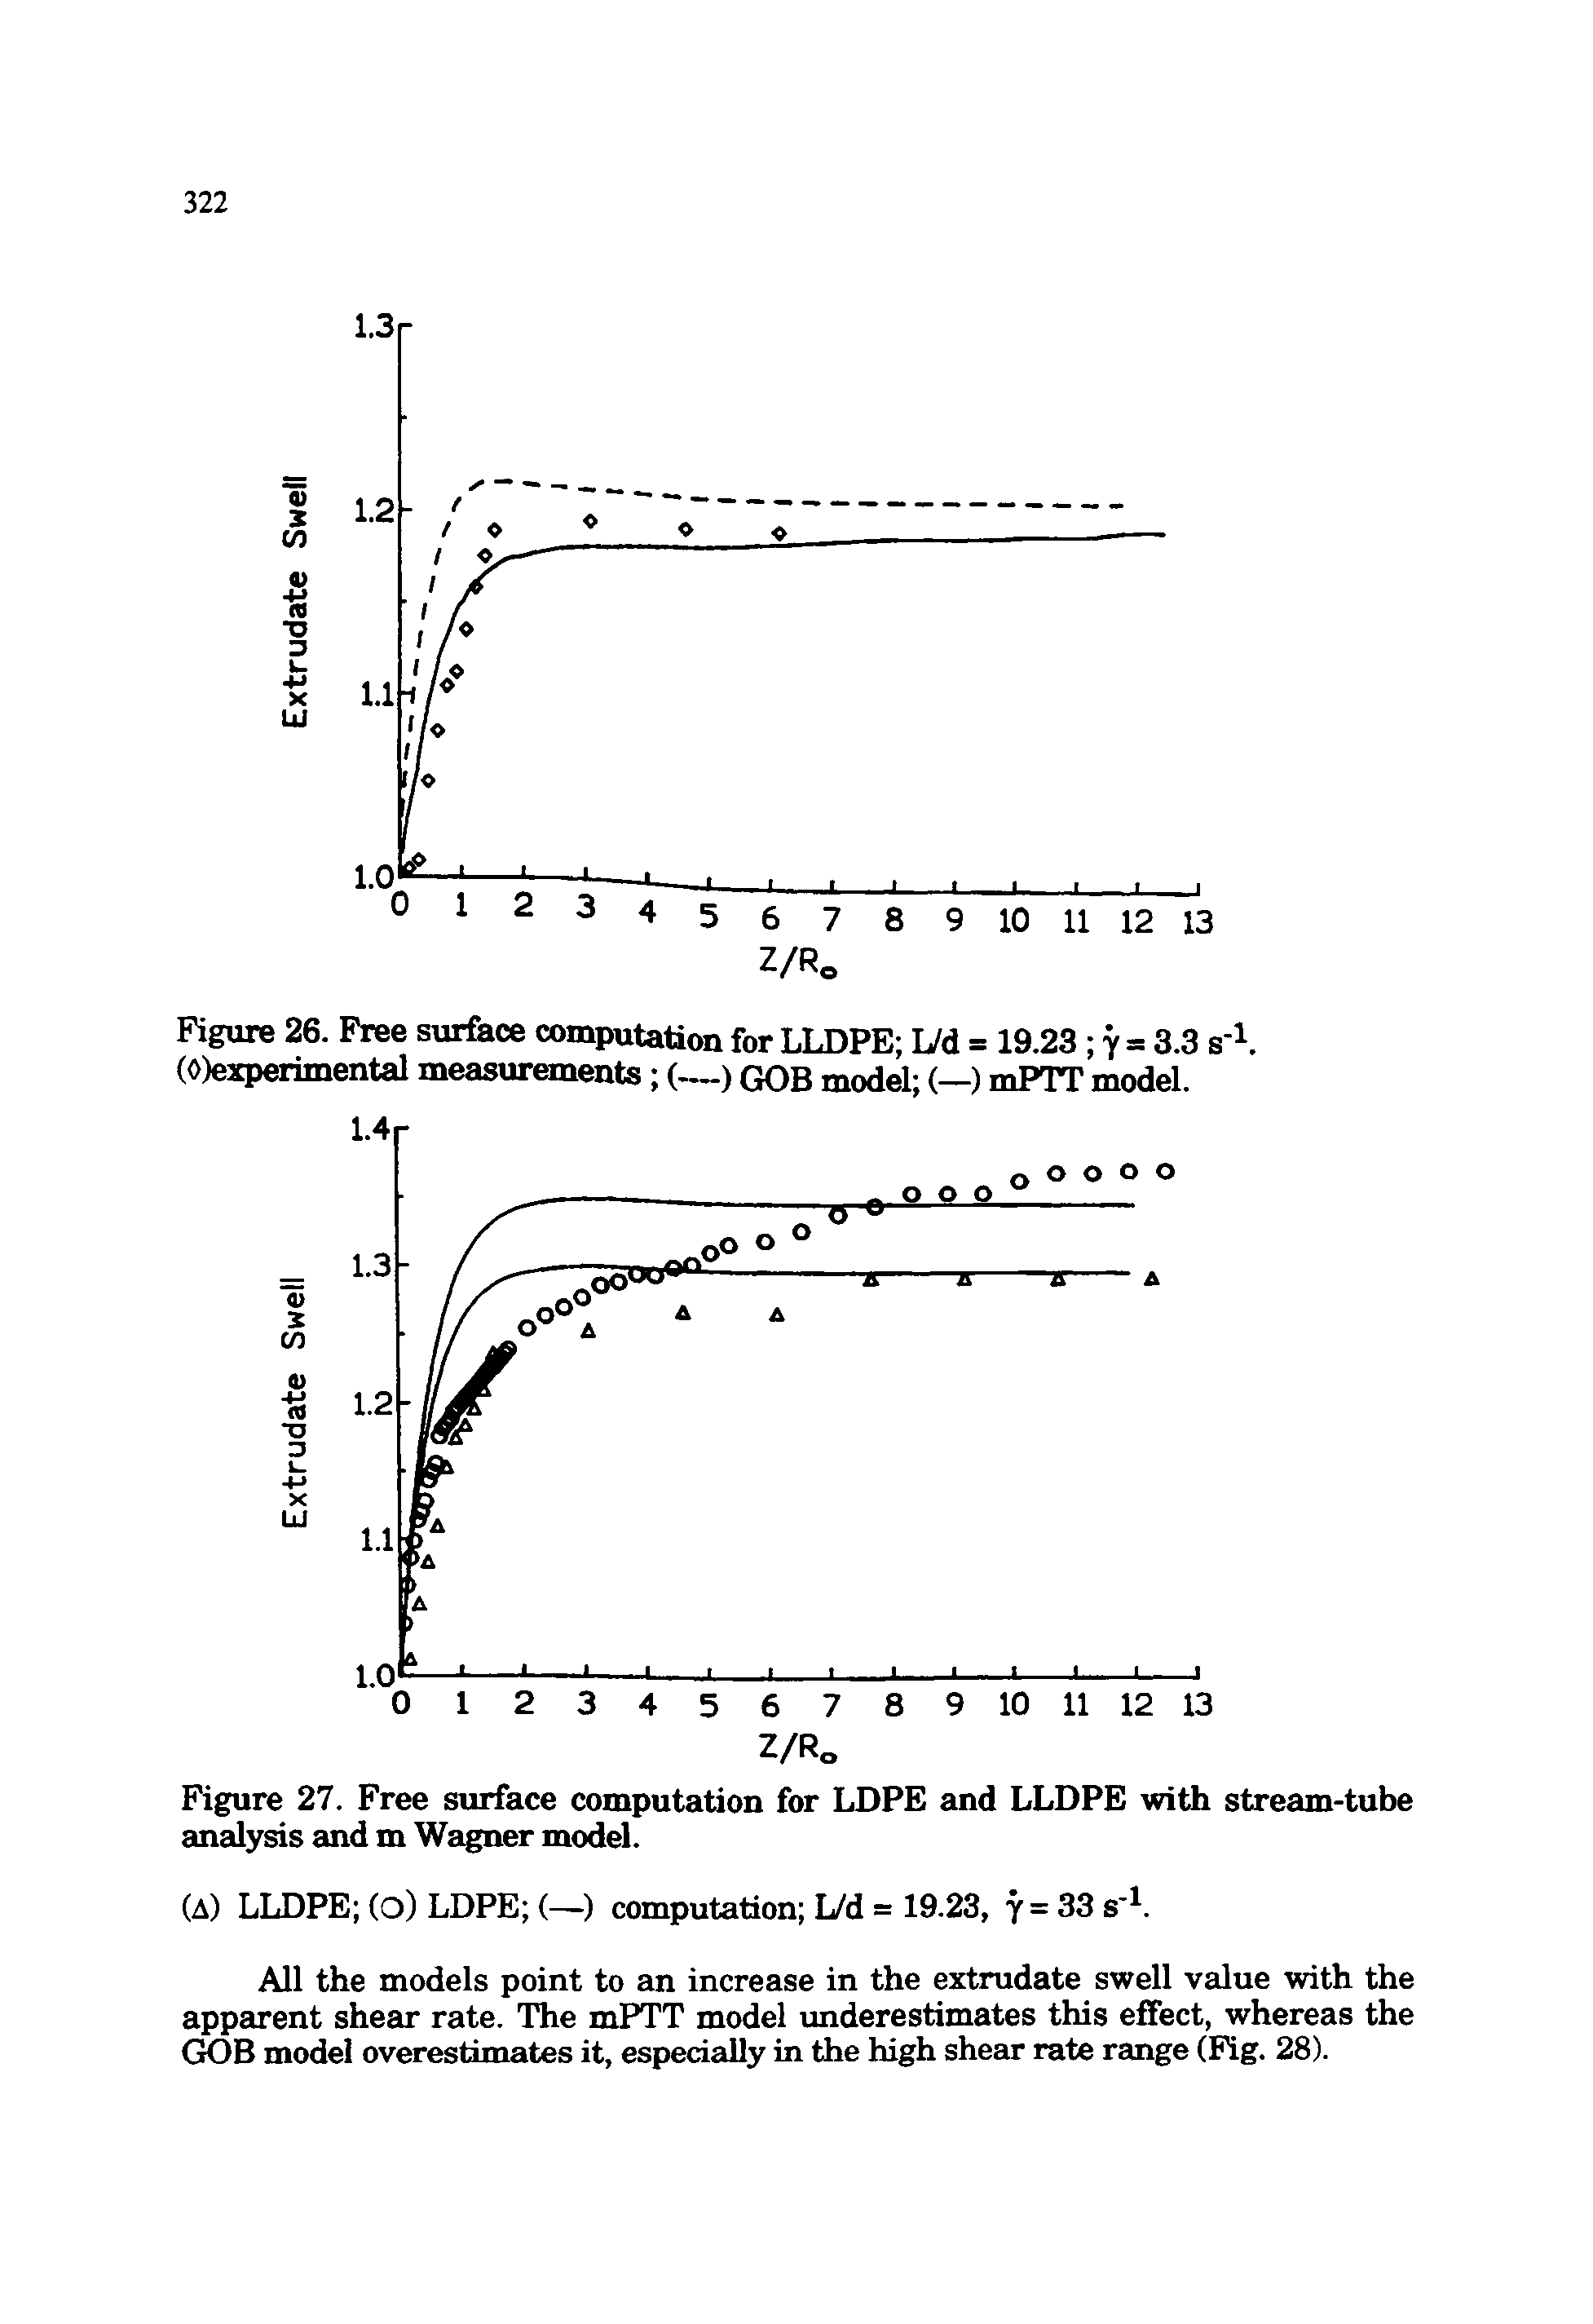 Figure 27. Free surface computation for LDPE and LLDPE with stream-tube analysis and m Wagner model.